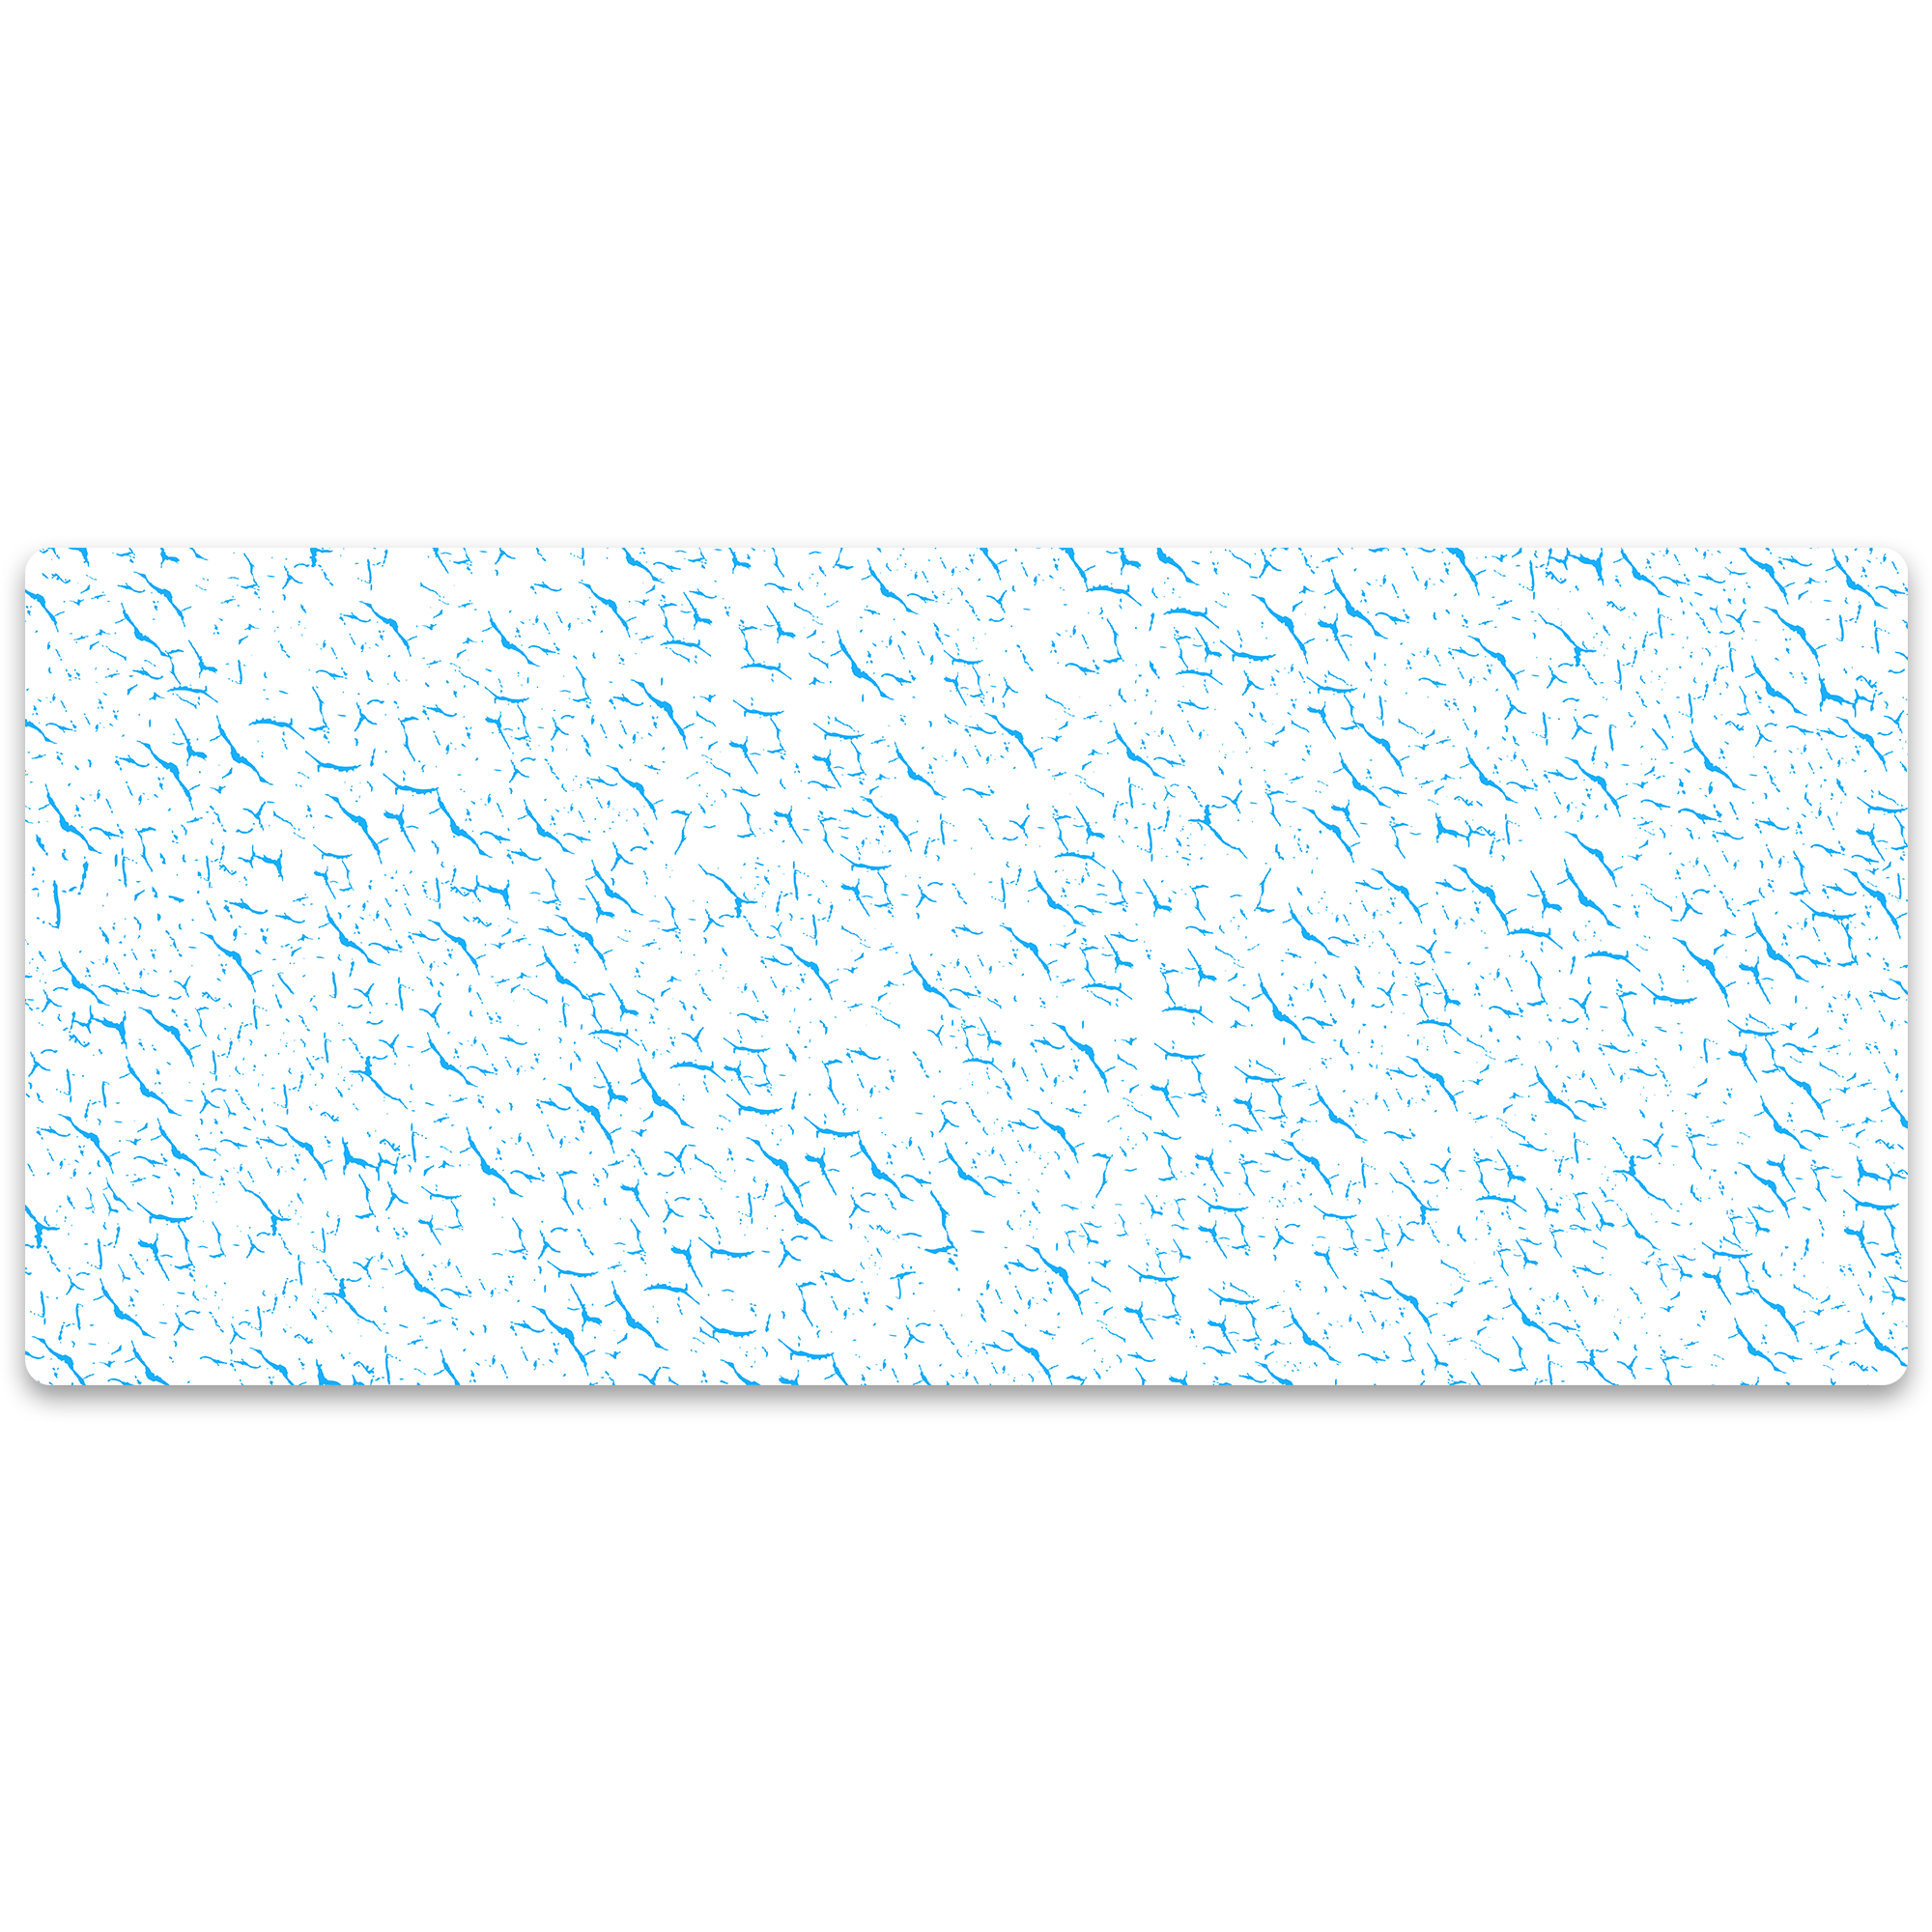 One Tap' Mouse Pad (White)